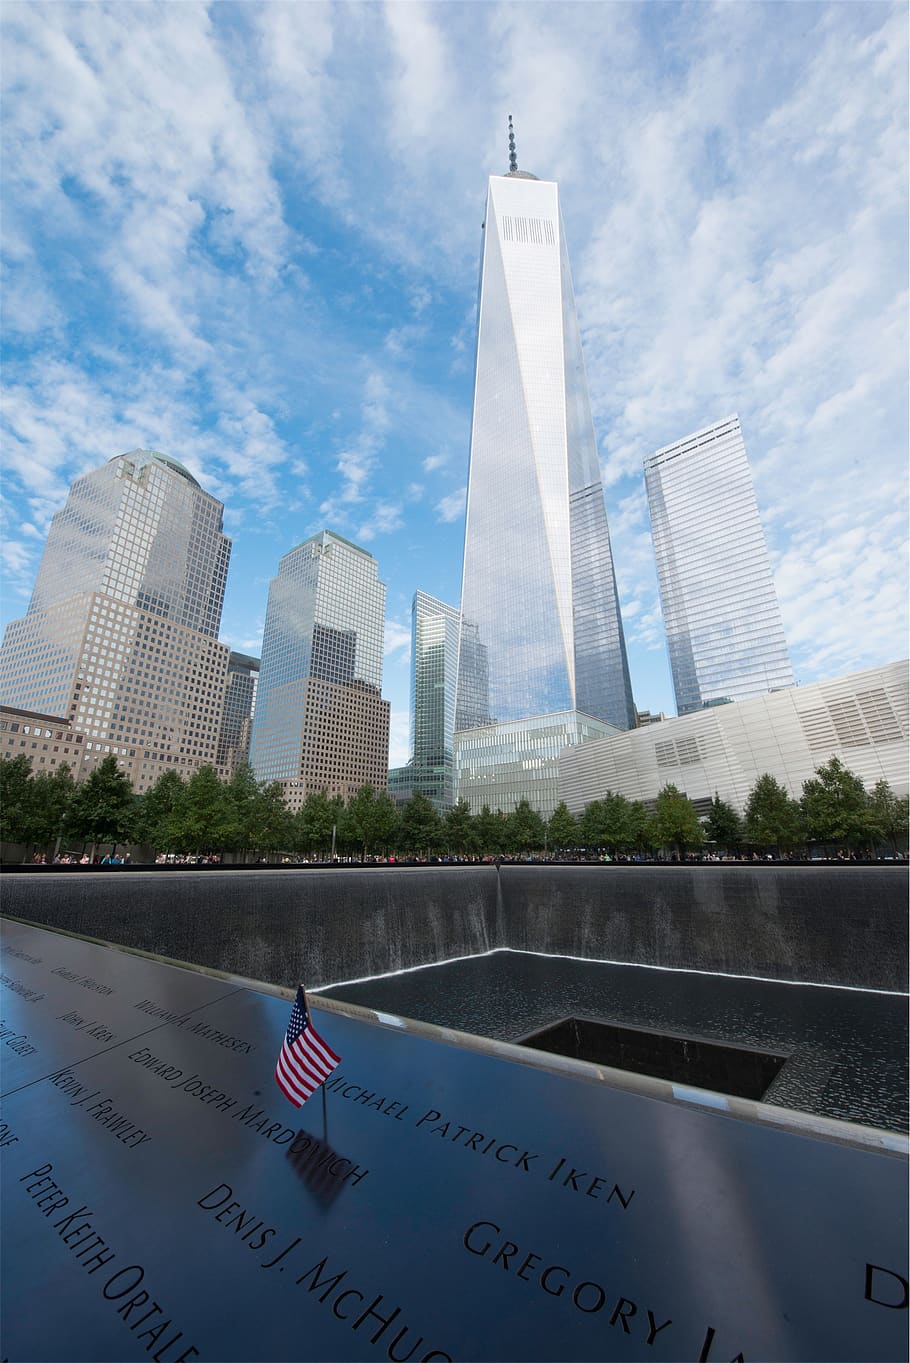 911, New York, city, twin towers, NYC, american, flag, USA, buildings, architecture